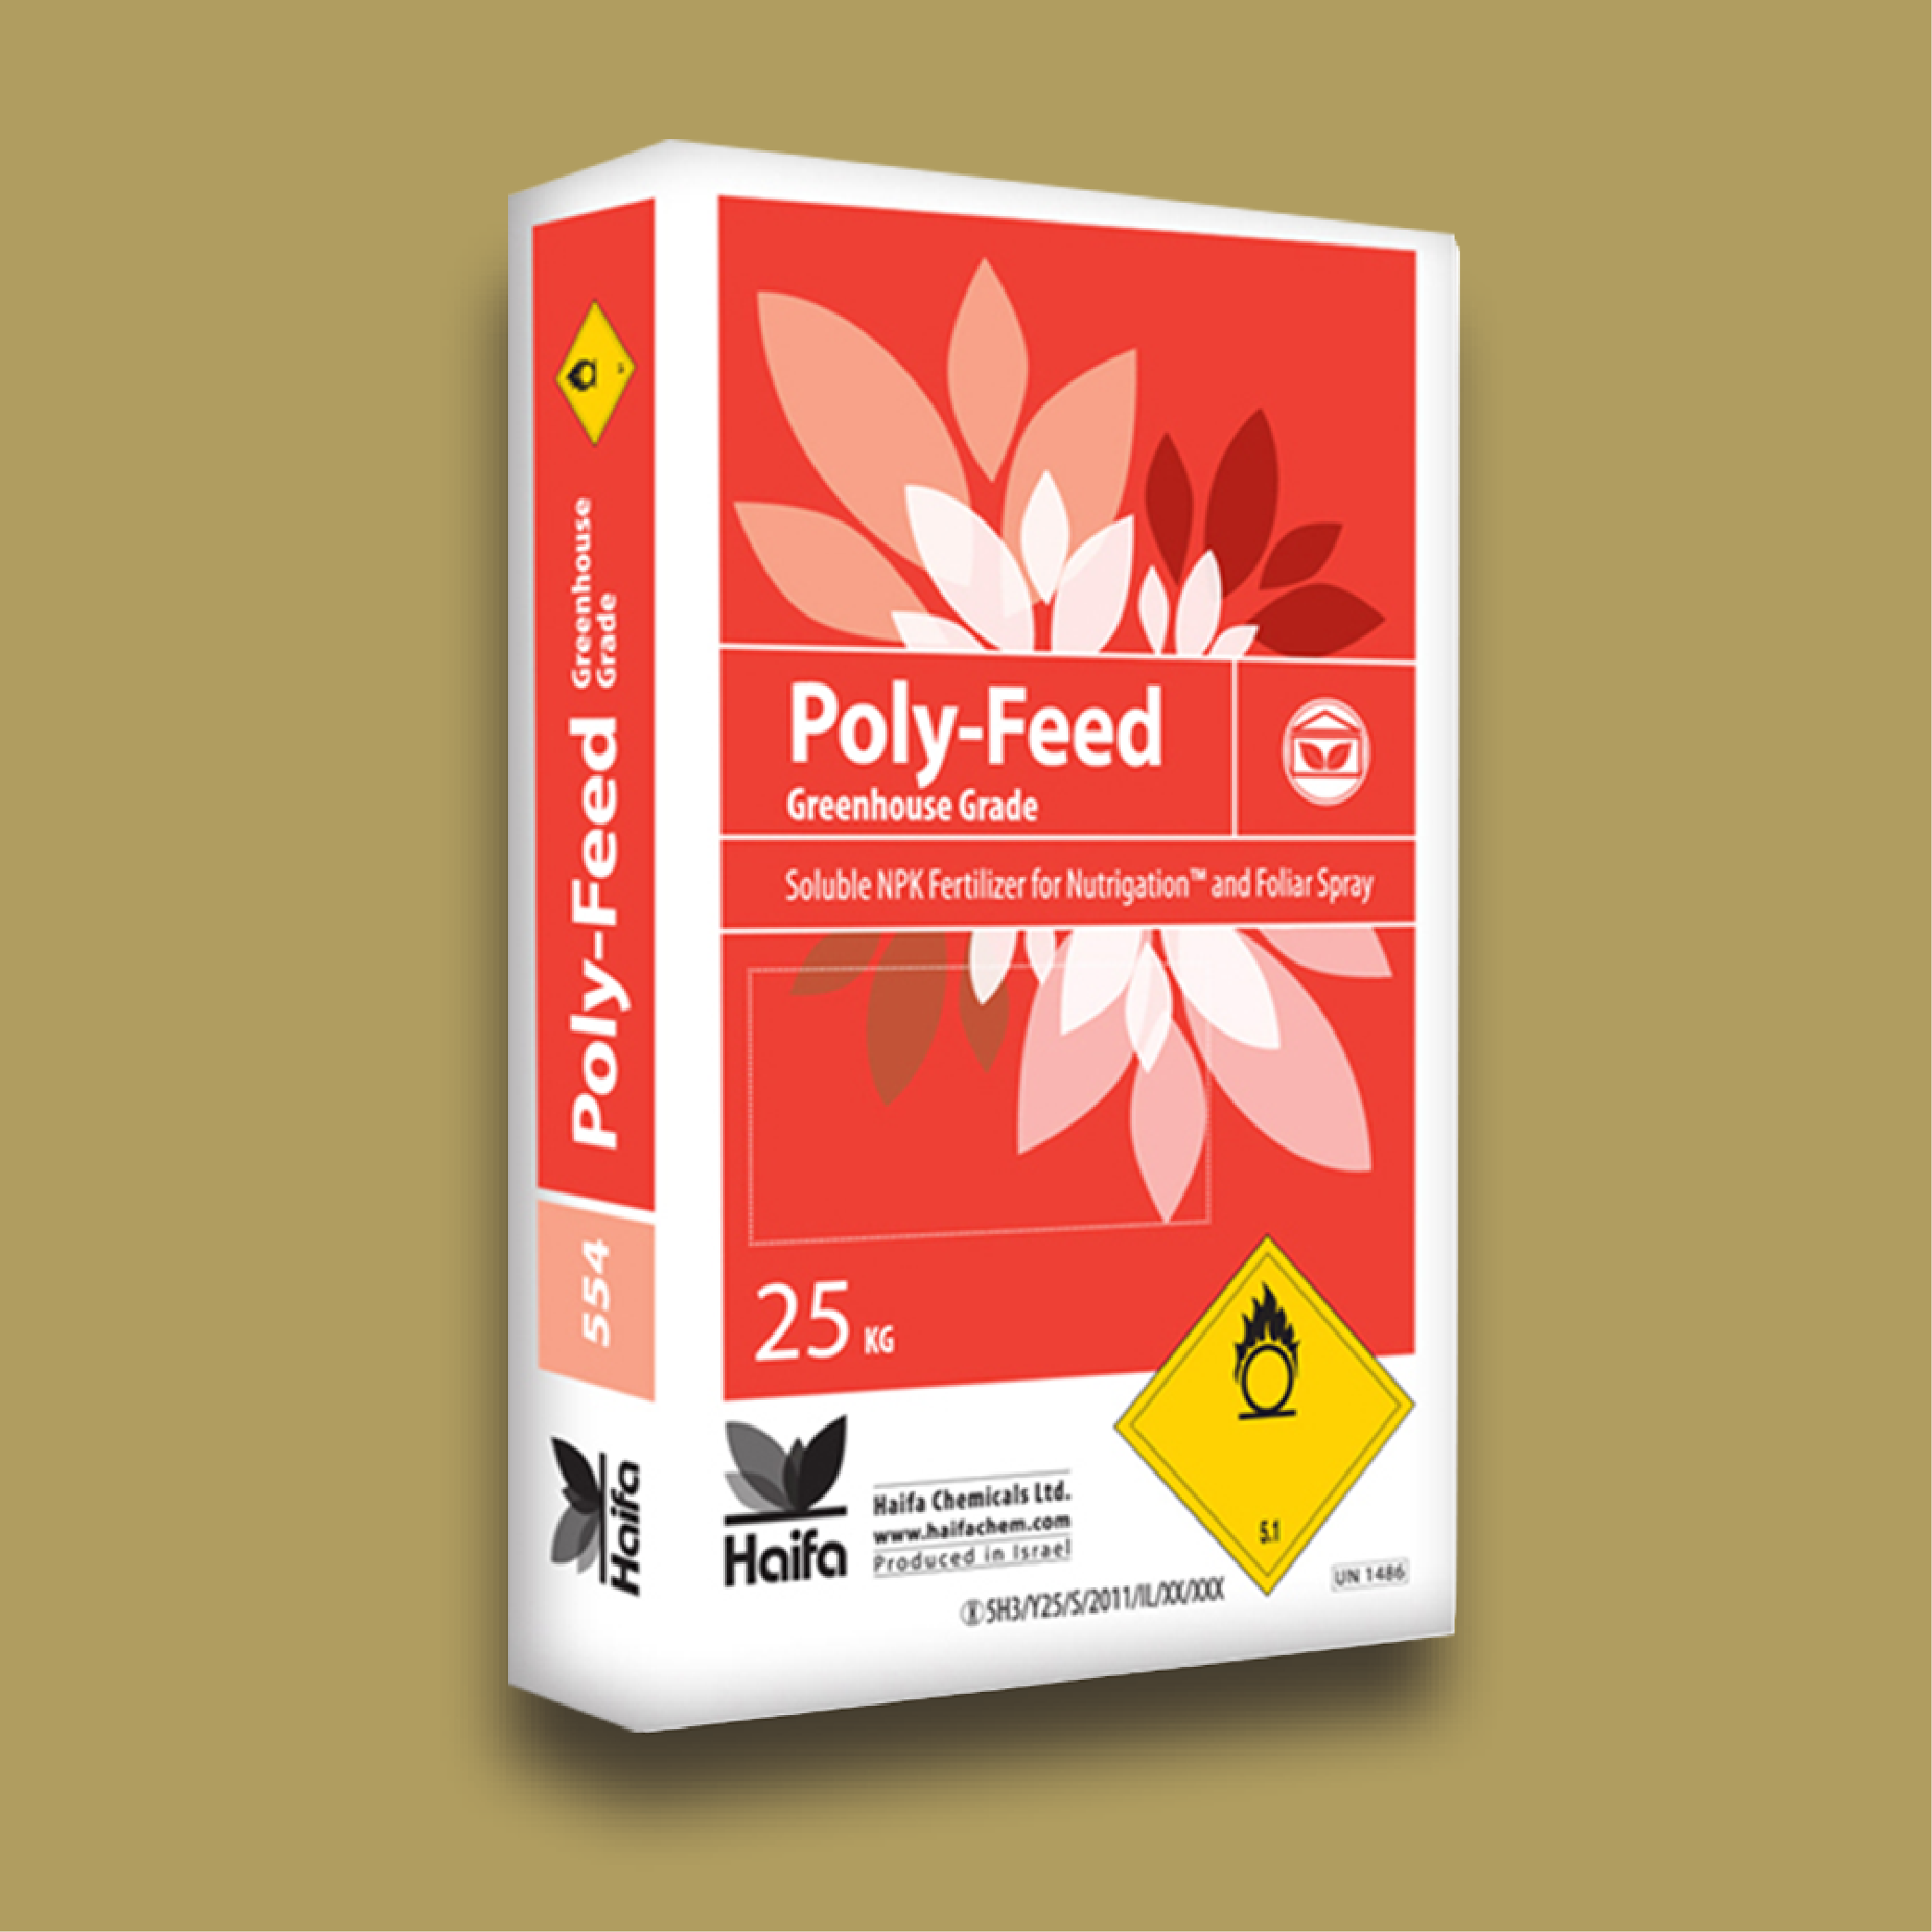 Producto Ferman Poly-Feed GG